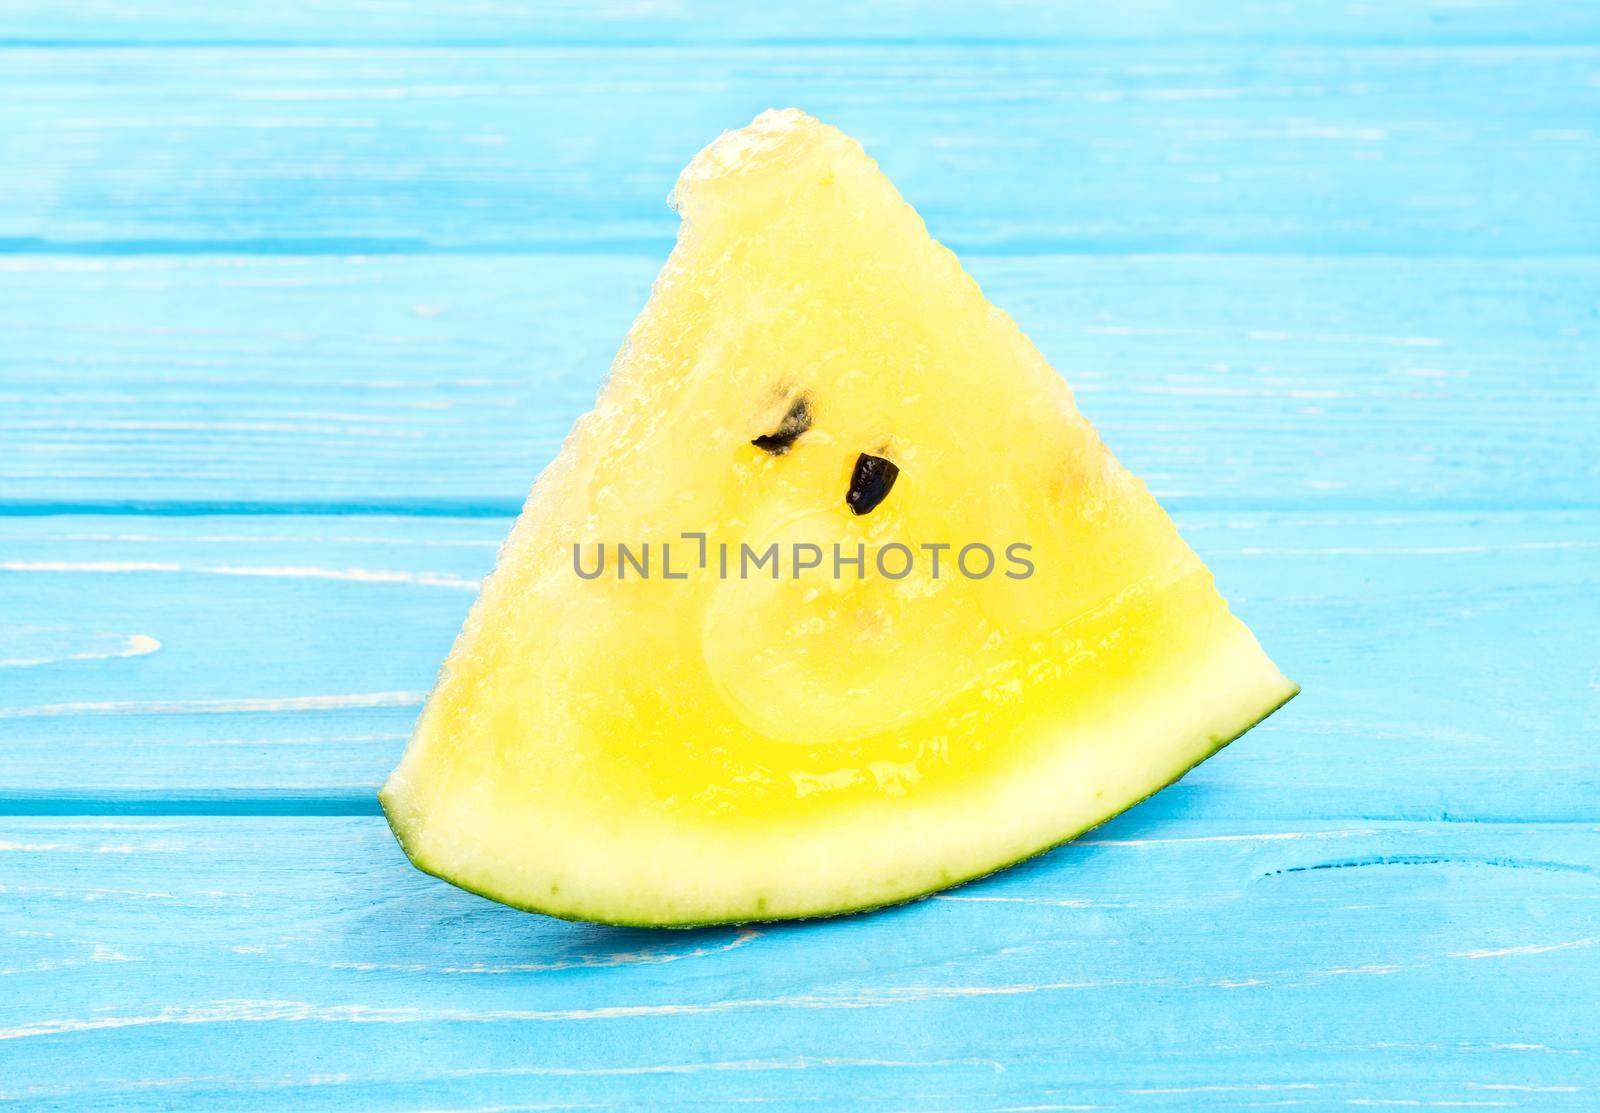 Triangular slice of yellow watermelon on a blue table